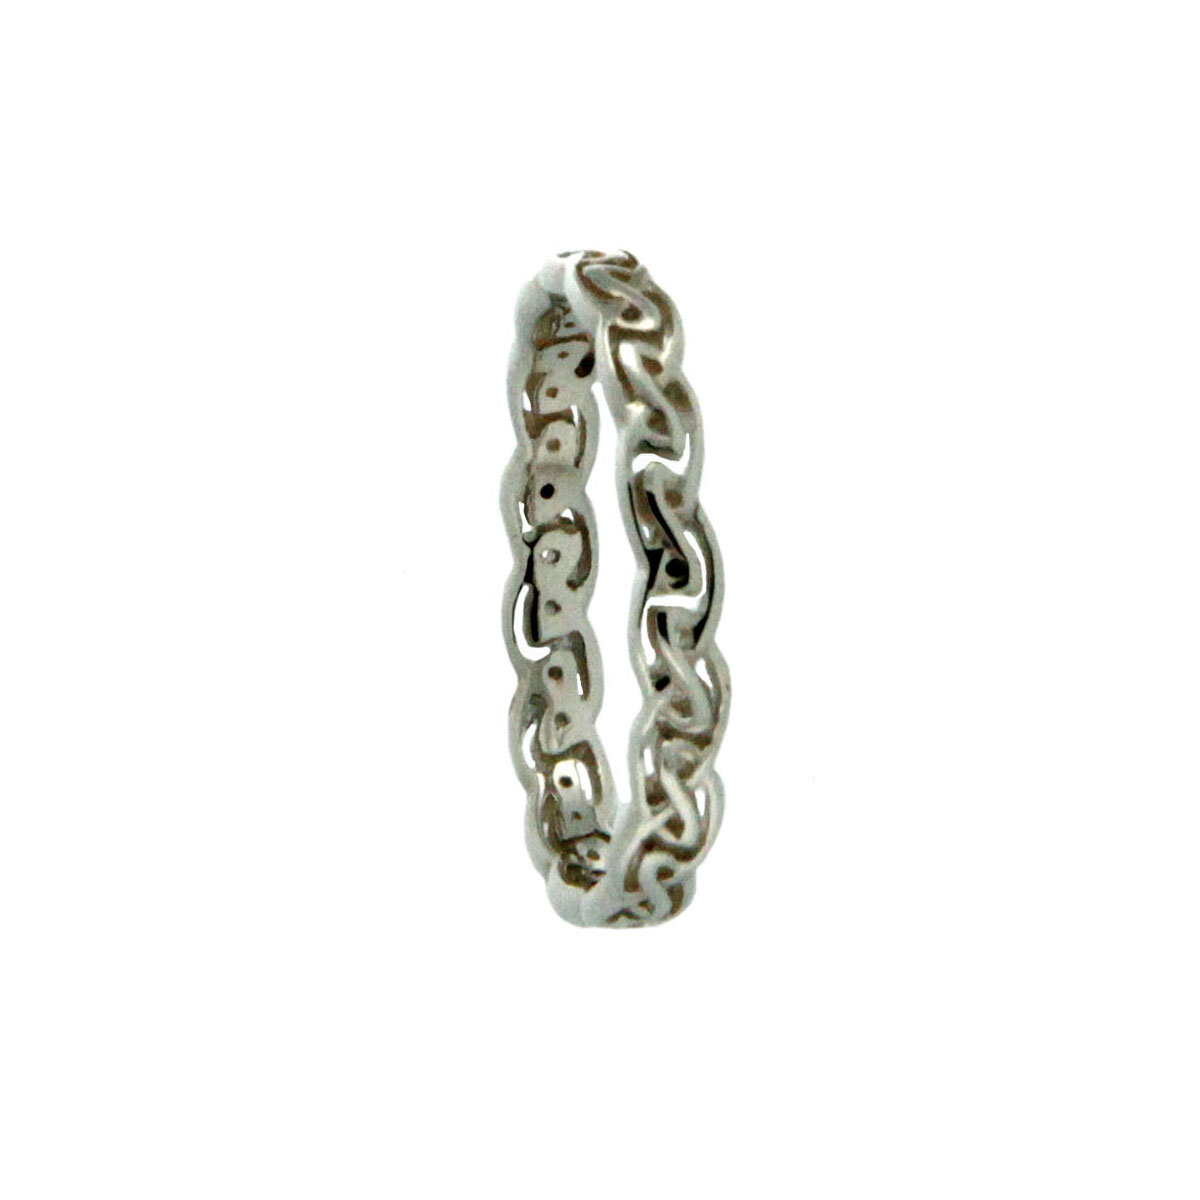 Narrow Sterling Silver Celtic Knot Wedding Ring